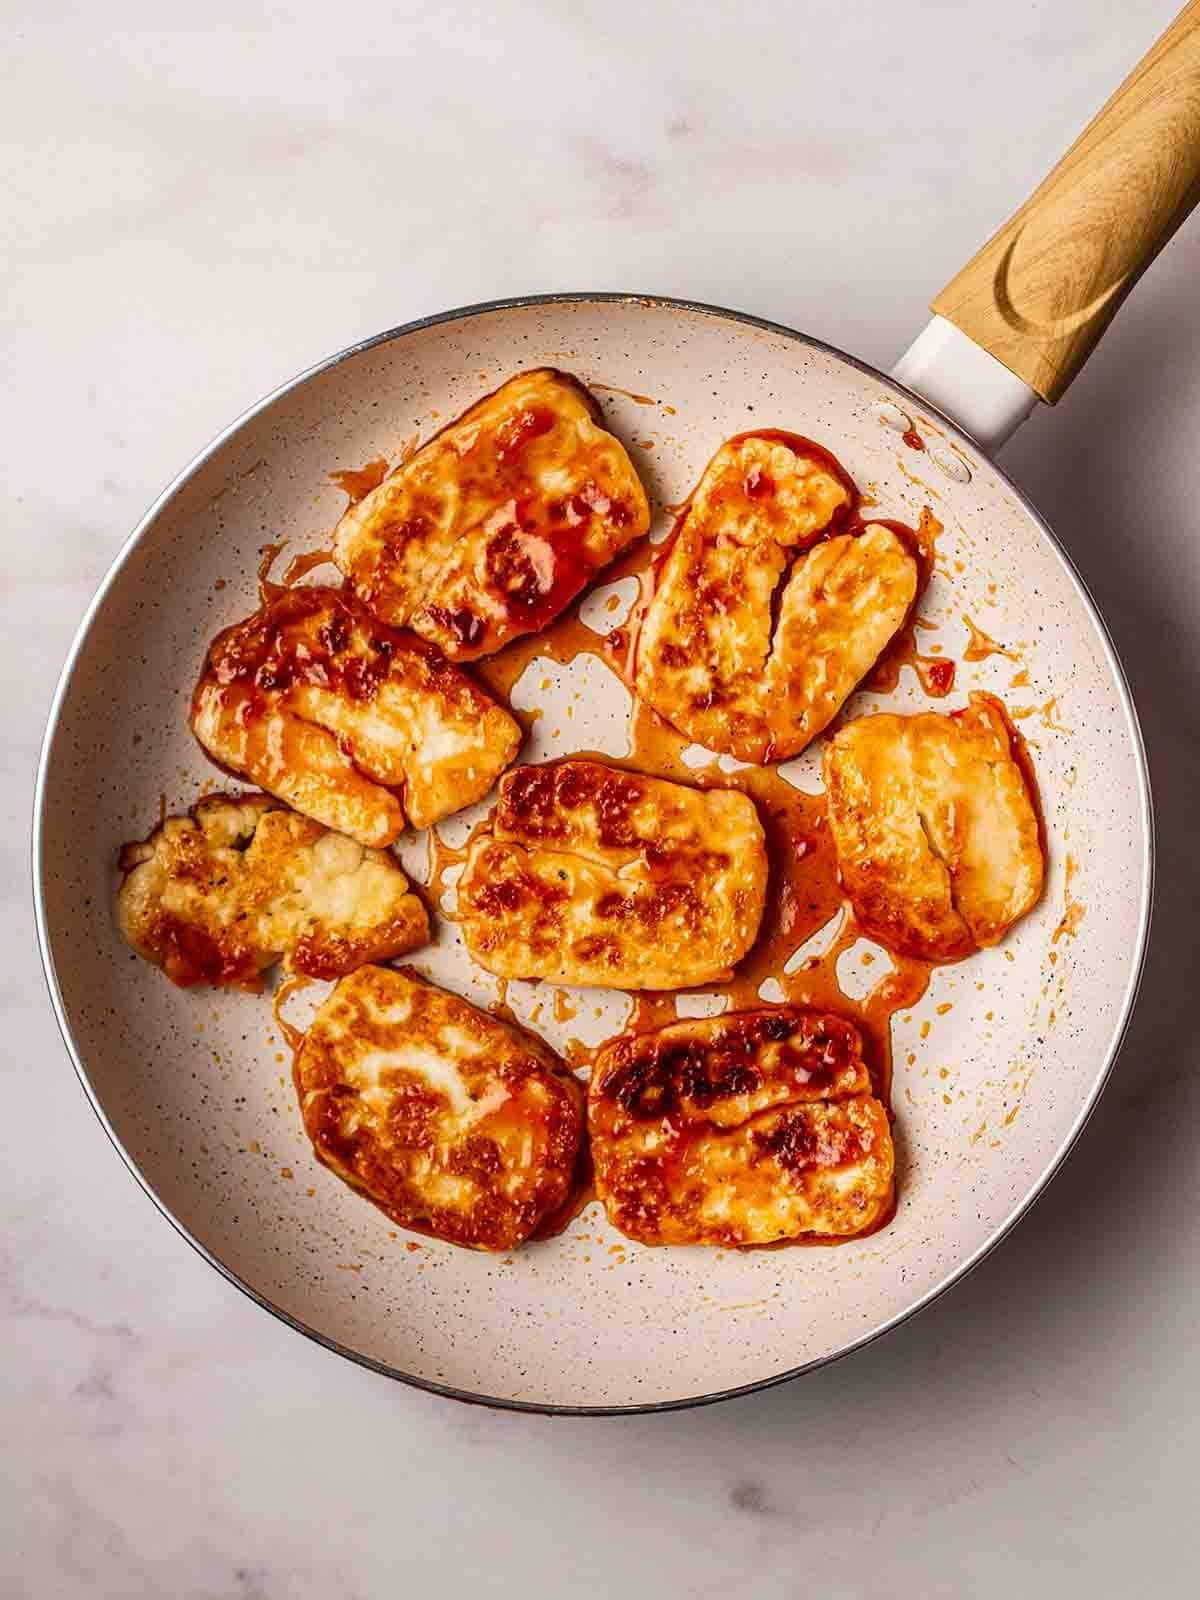 Slices of halloumi in a frying pan, being fried in red sweet chilli sticky sauce, for the recipe Halloumi Wraps.